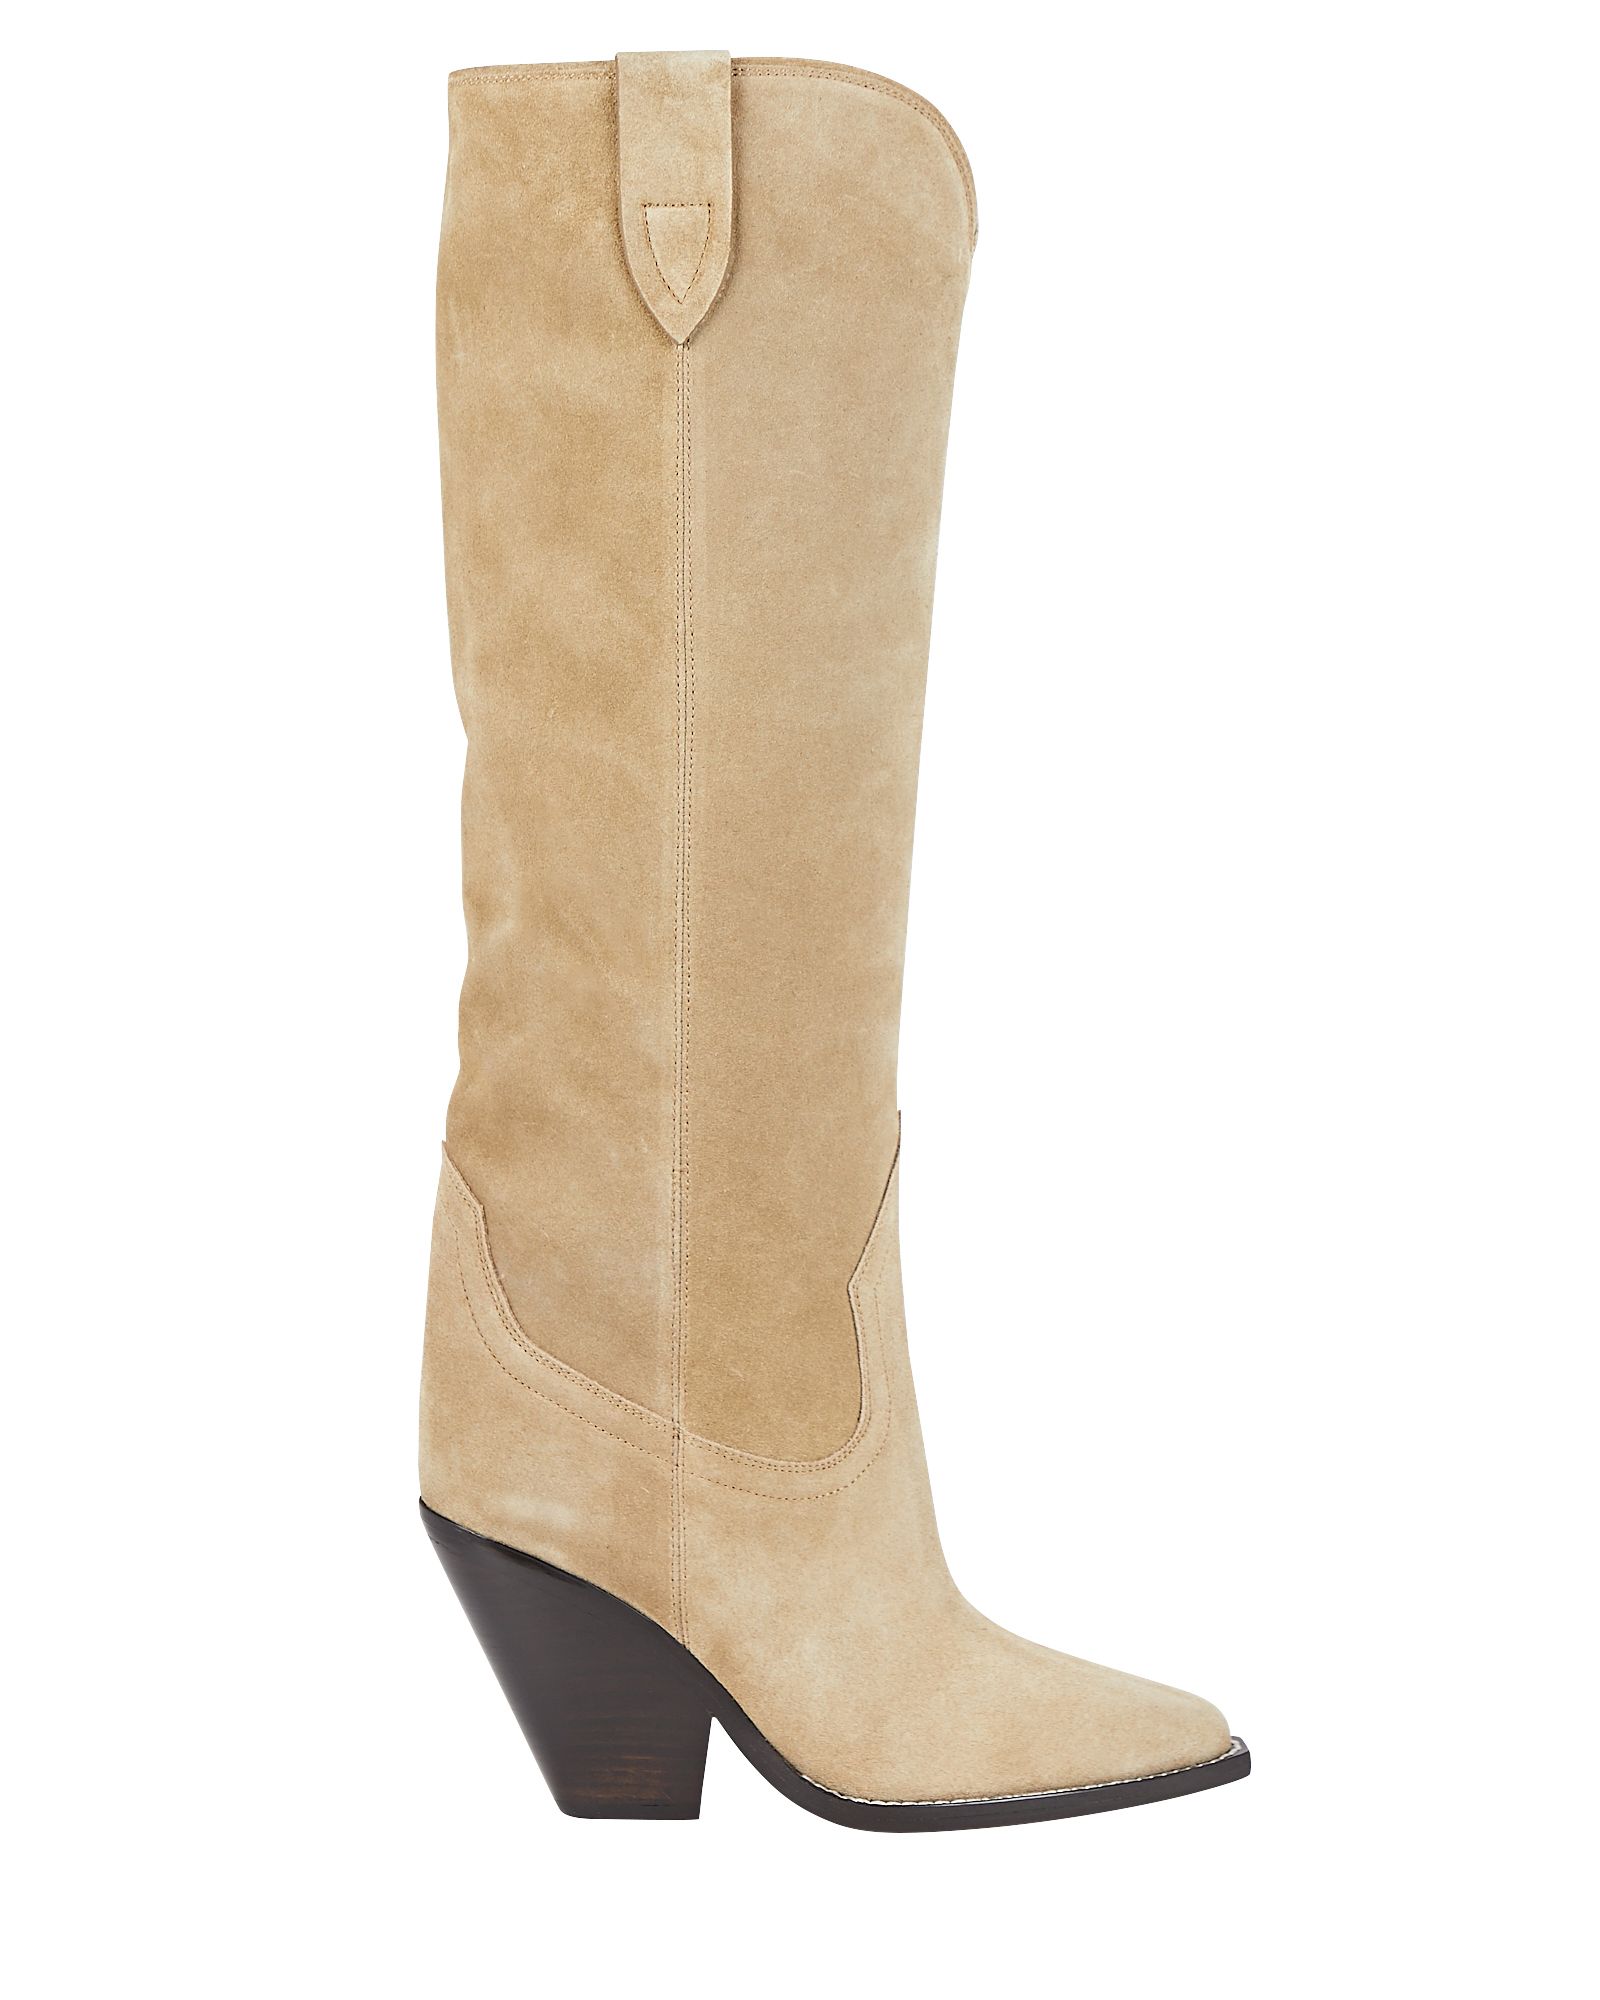 Lomero Suede Knee-High Western Boots | INTERMIX